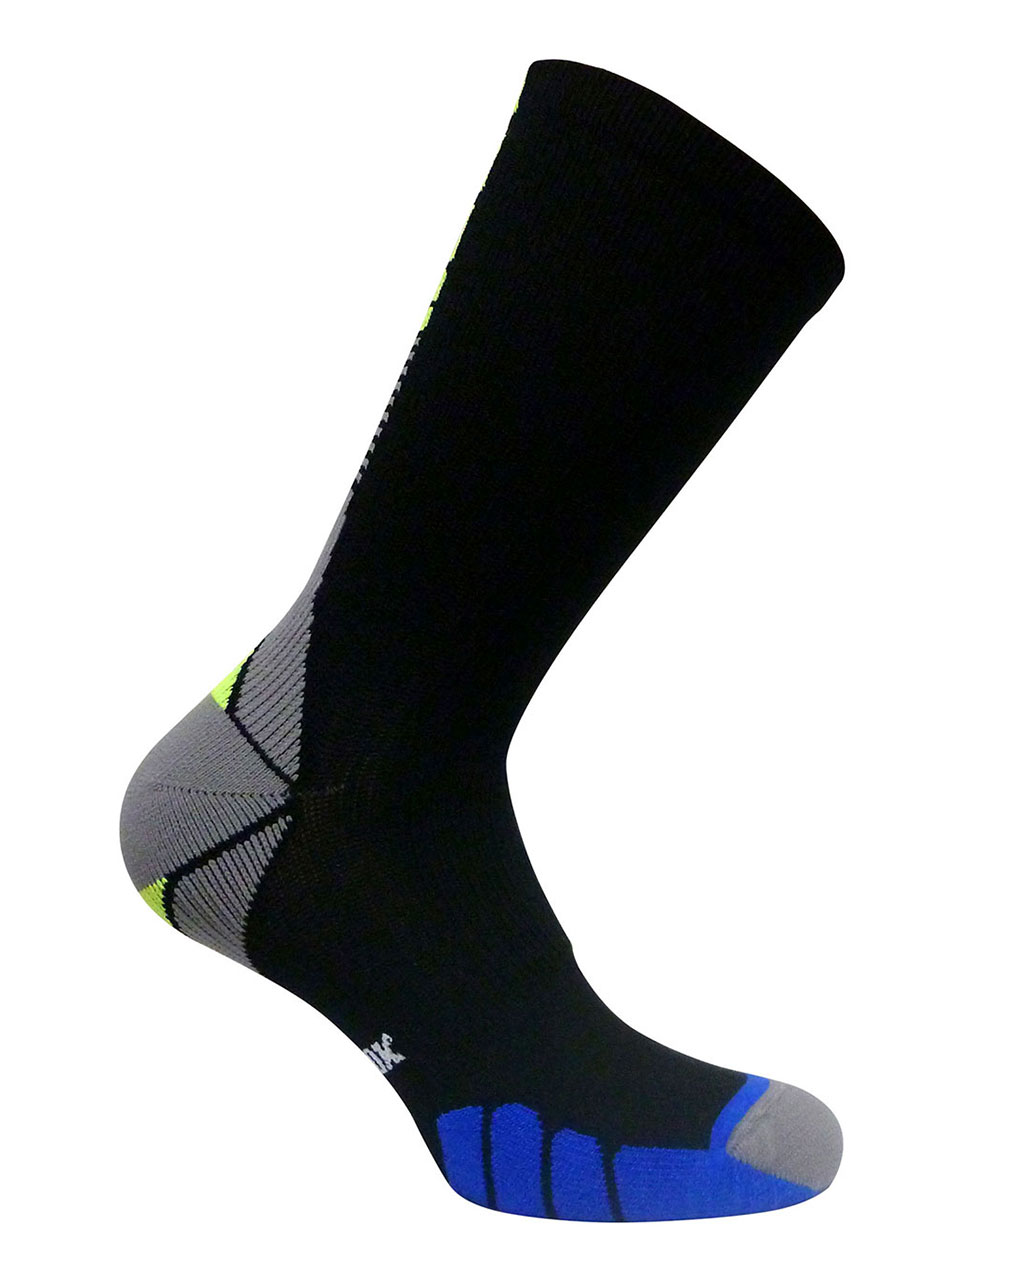 1 pair Fitted Vitalsox VT6810 Italian Made Compression Ligament Support Sport Crew Socks with Silver DrystatItalian Black X-Large 